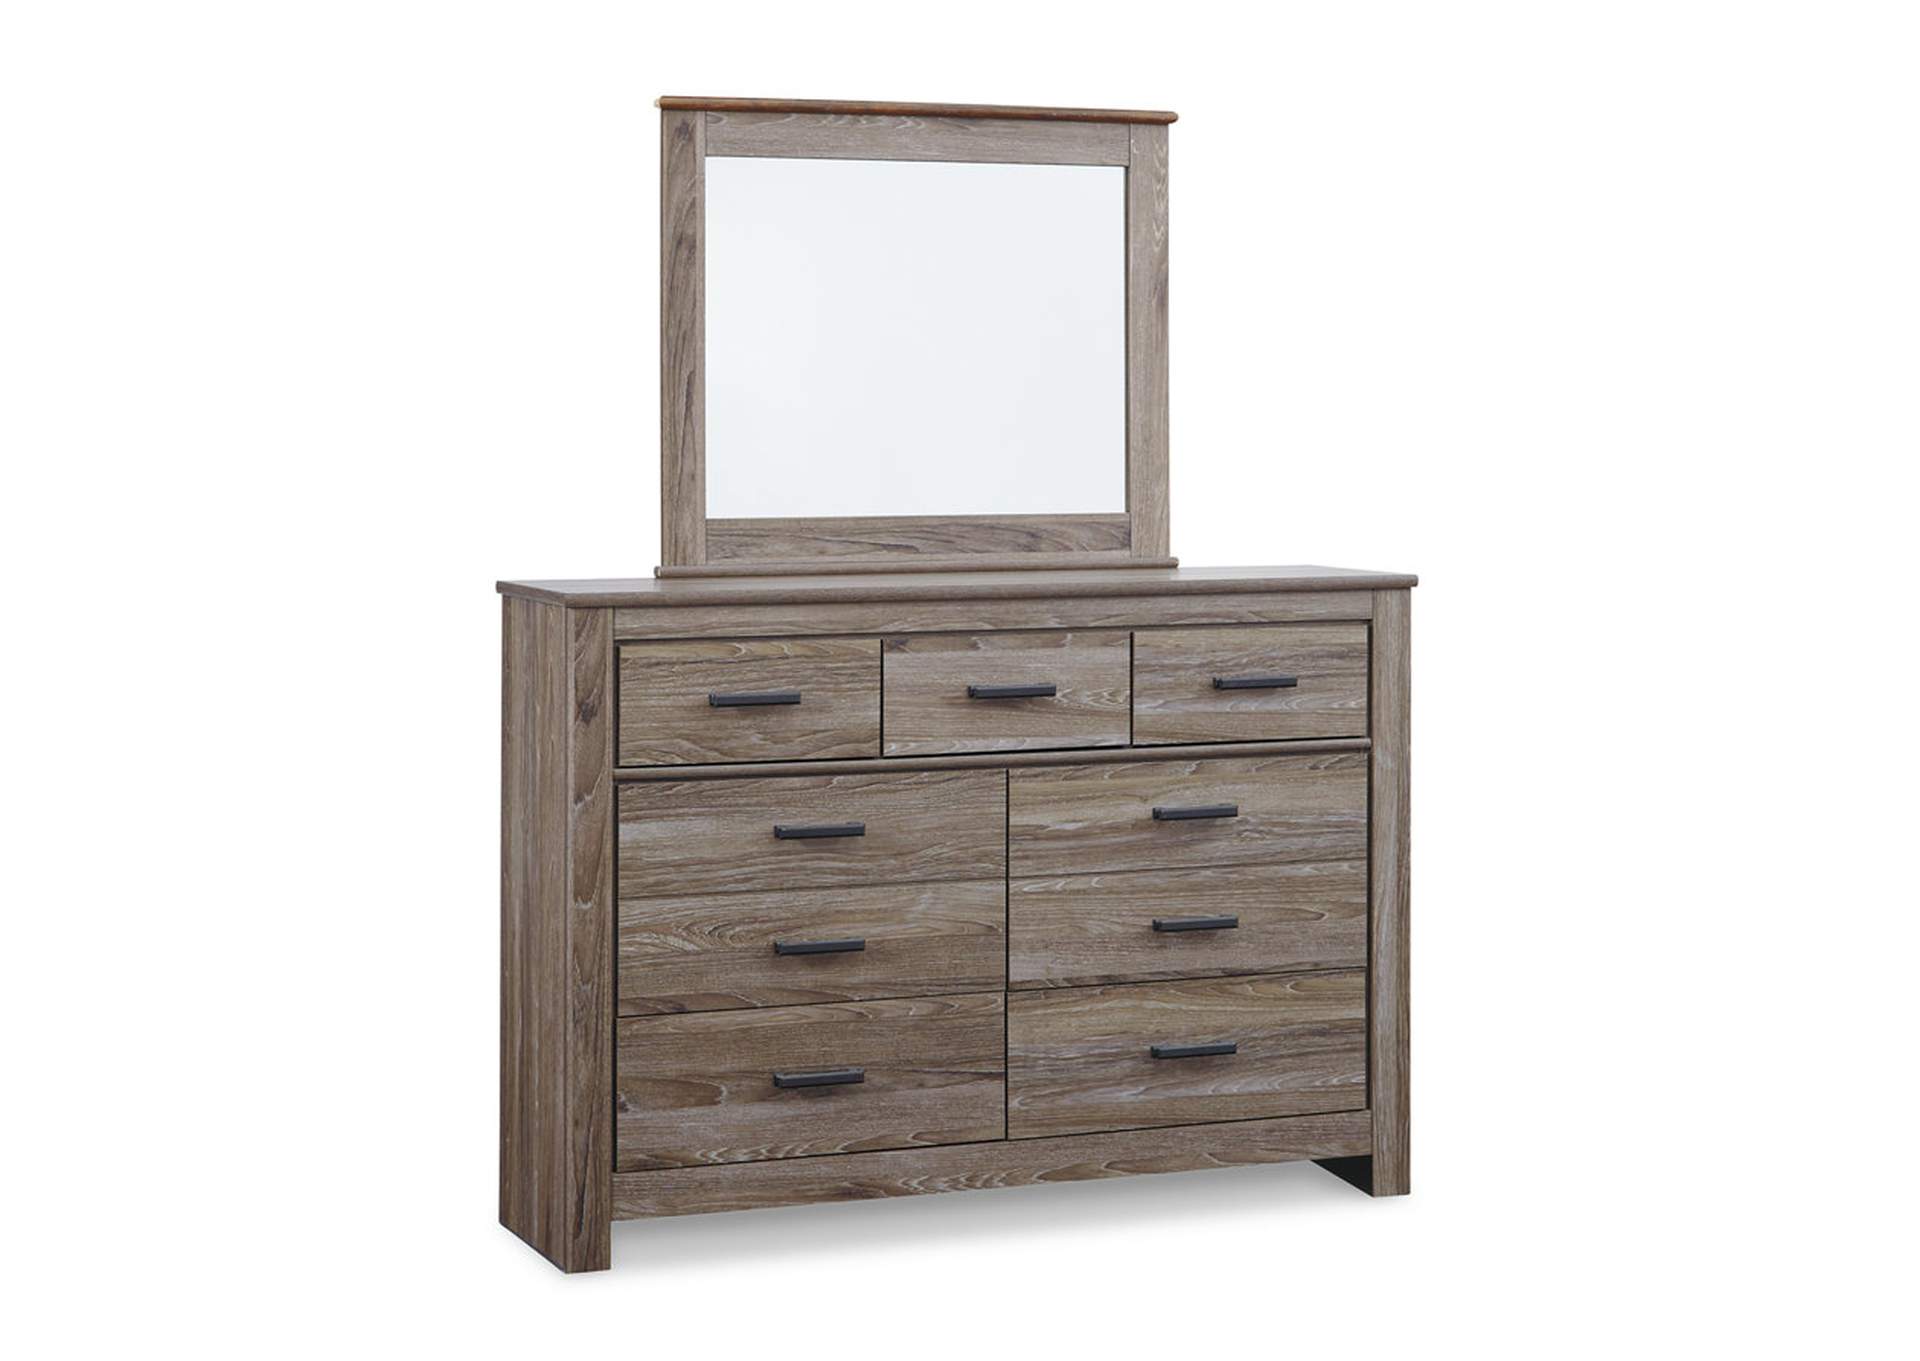 Zelen Queen Panel Bed with Mirrored Dresser and 2 Nightstands,Signature Design By Ashley